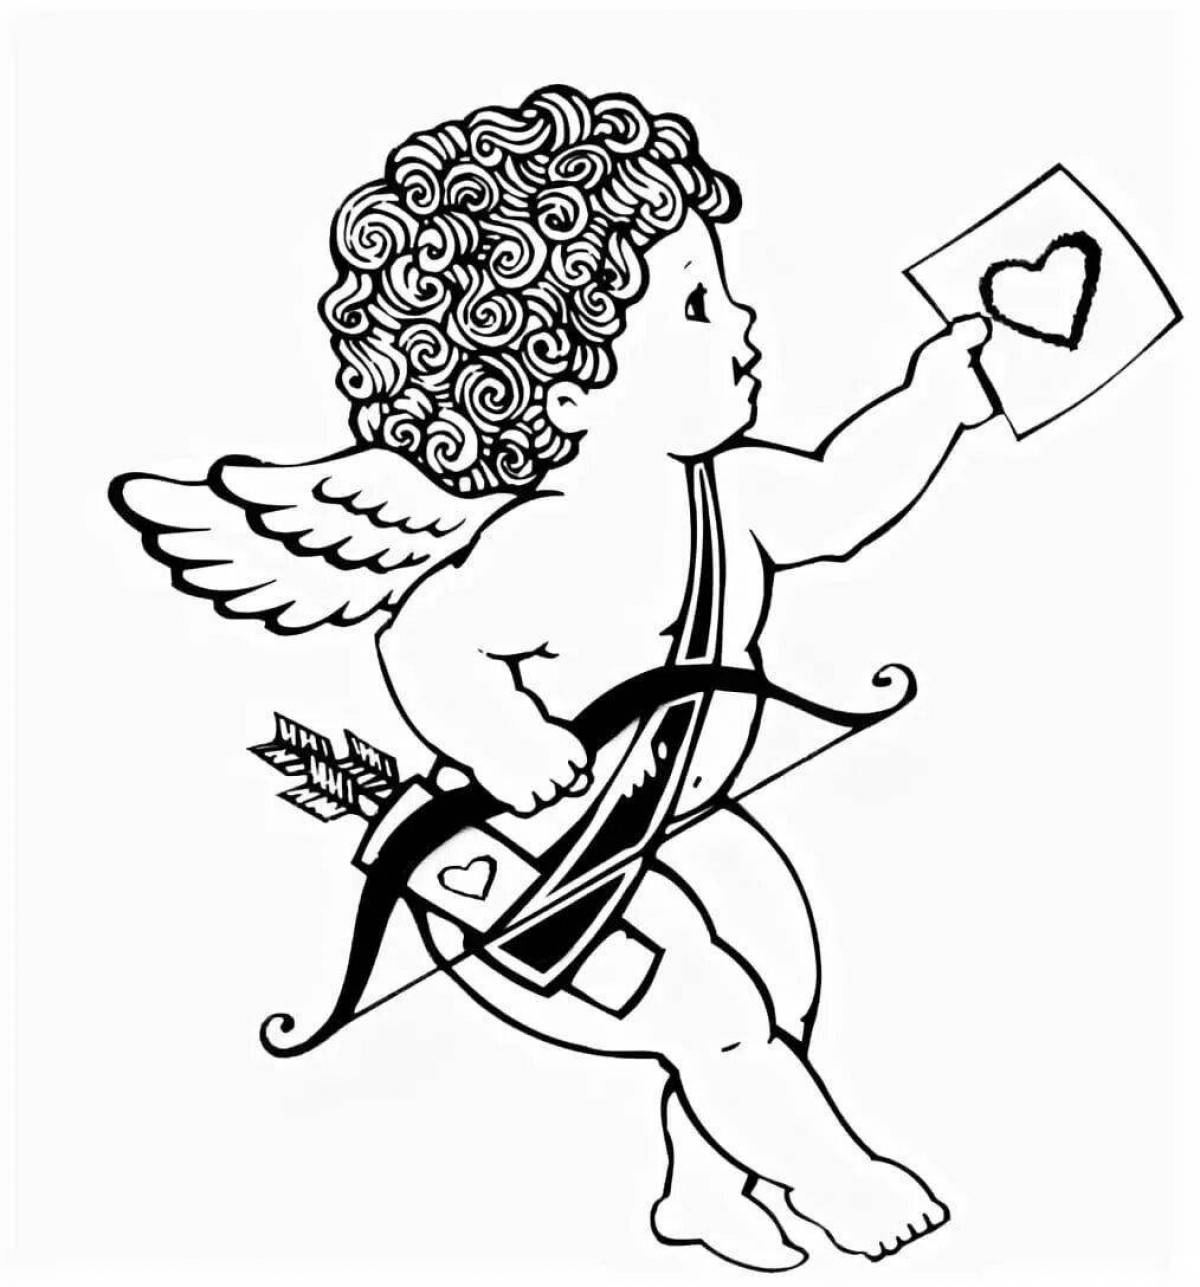 Coloring book cheerful cupid with heart